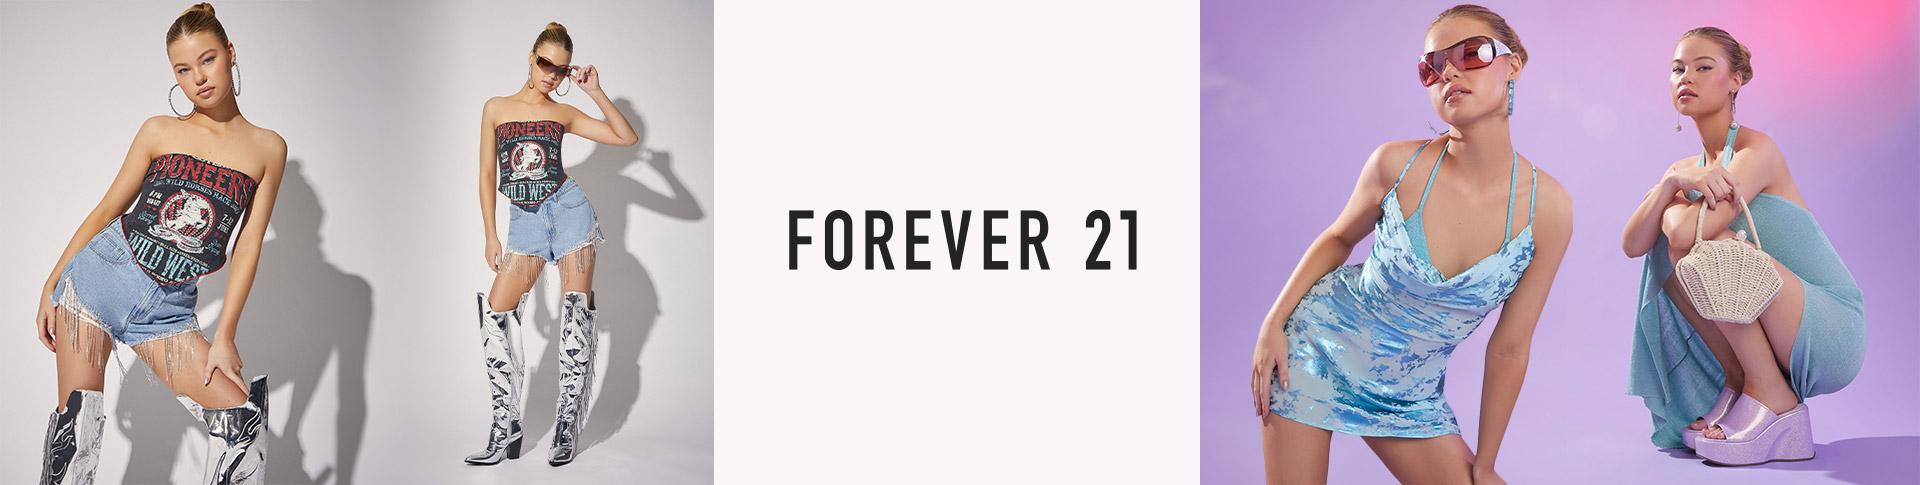 Forever 21 Clothing, Juniors' Clothing